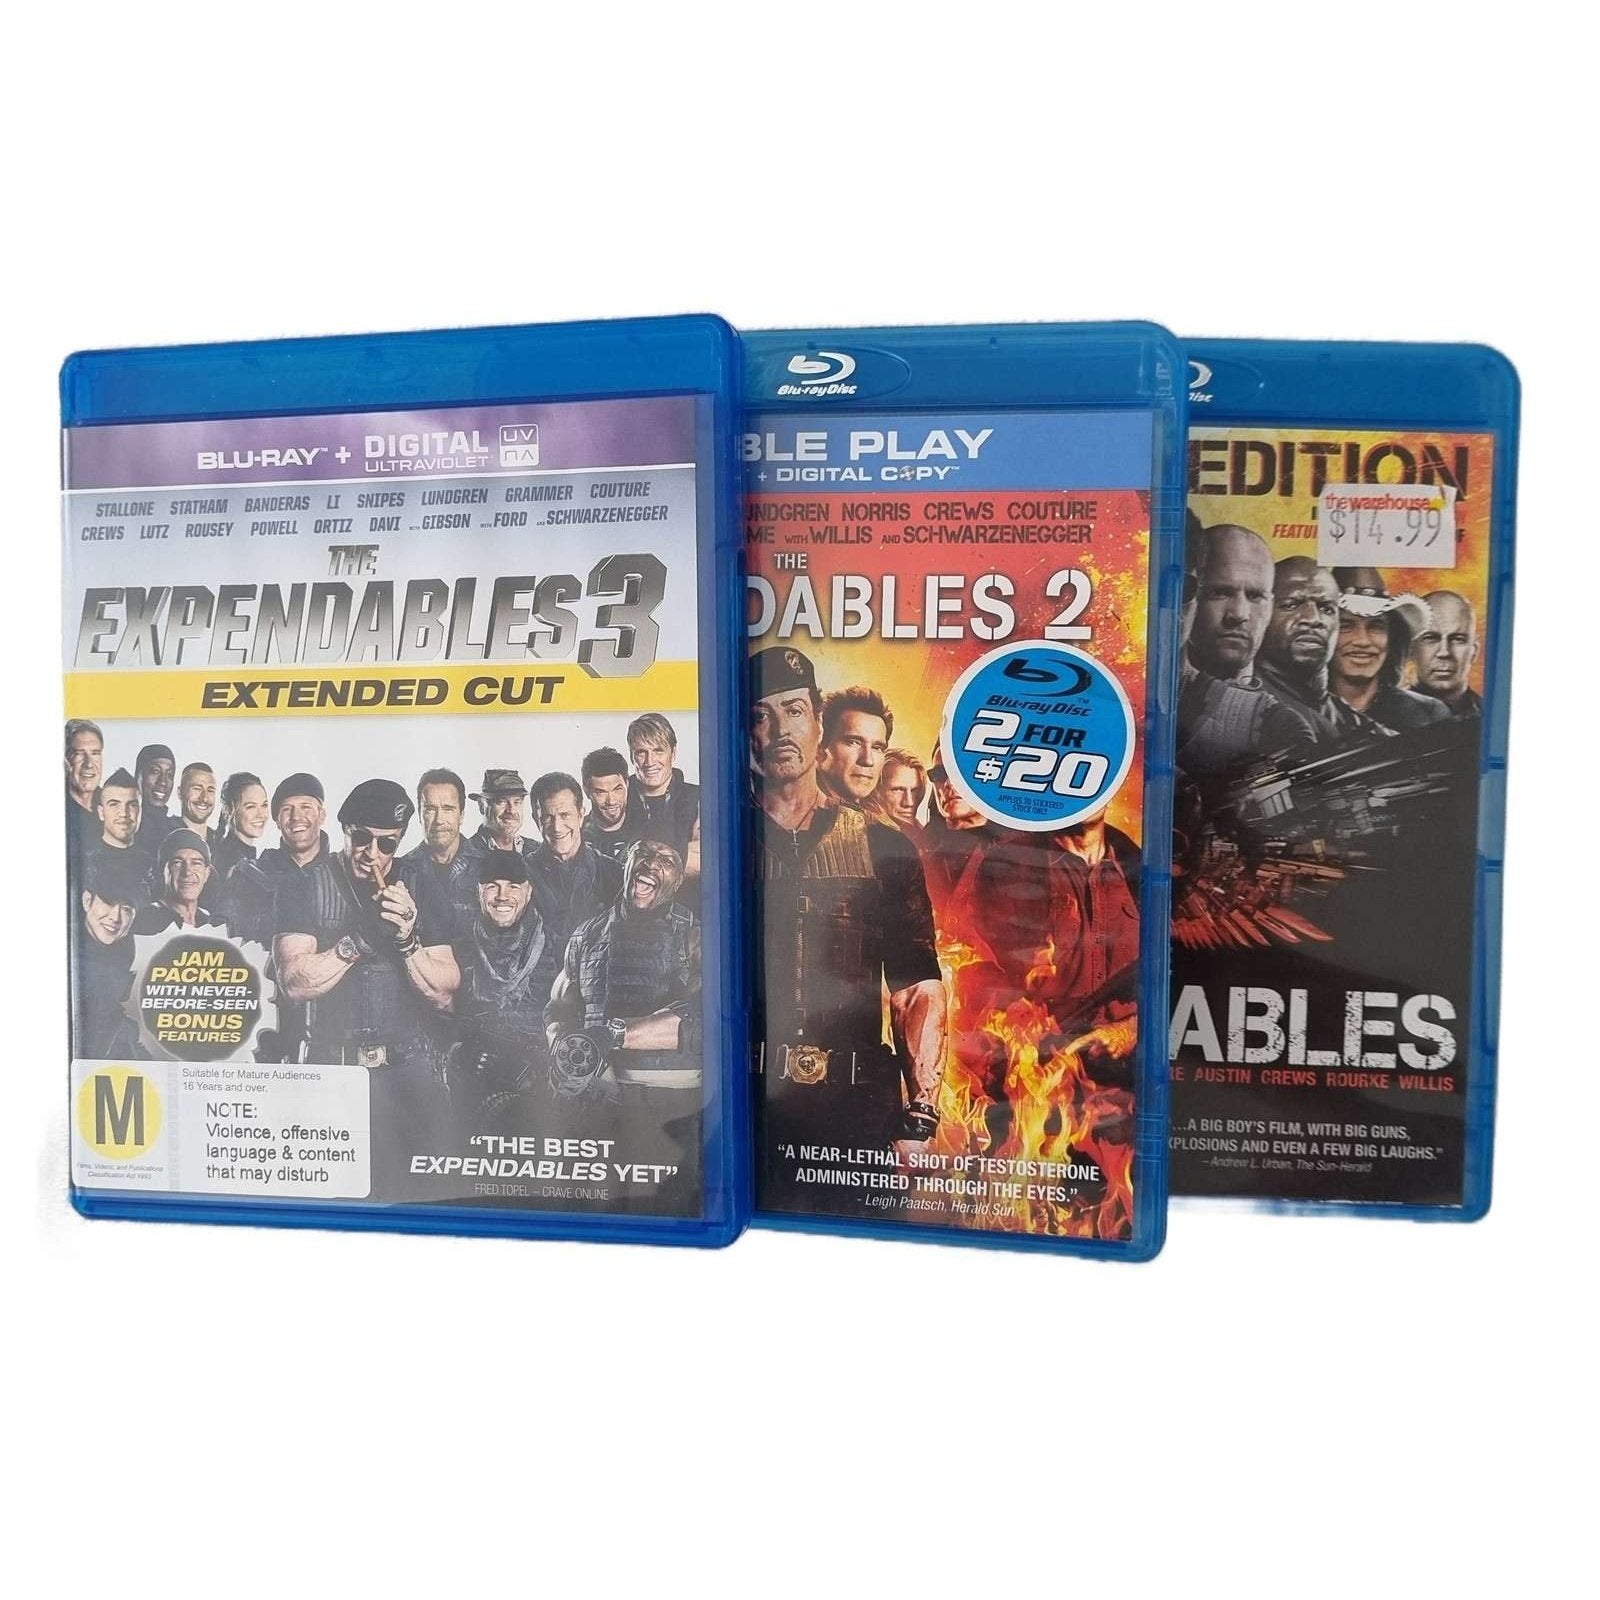 The Expendables Trilogy (Blu Ray)